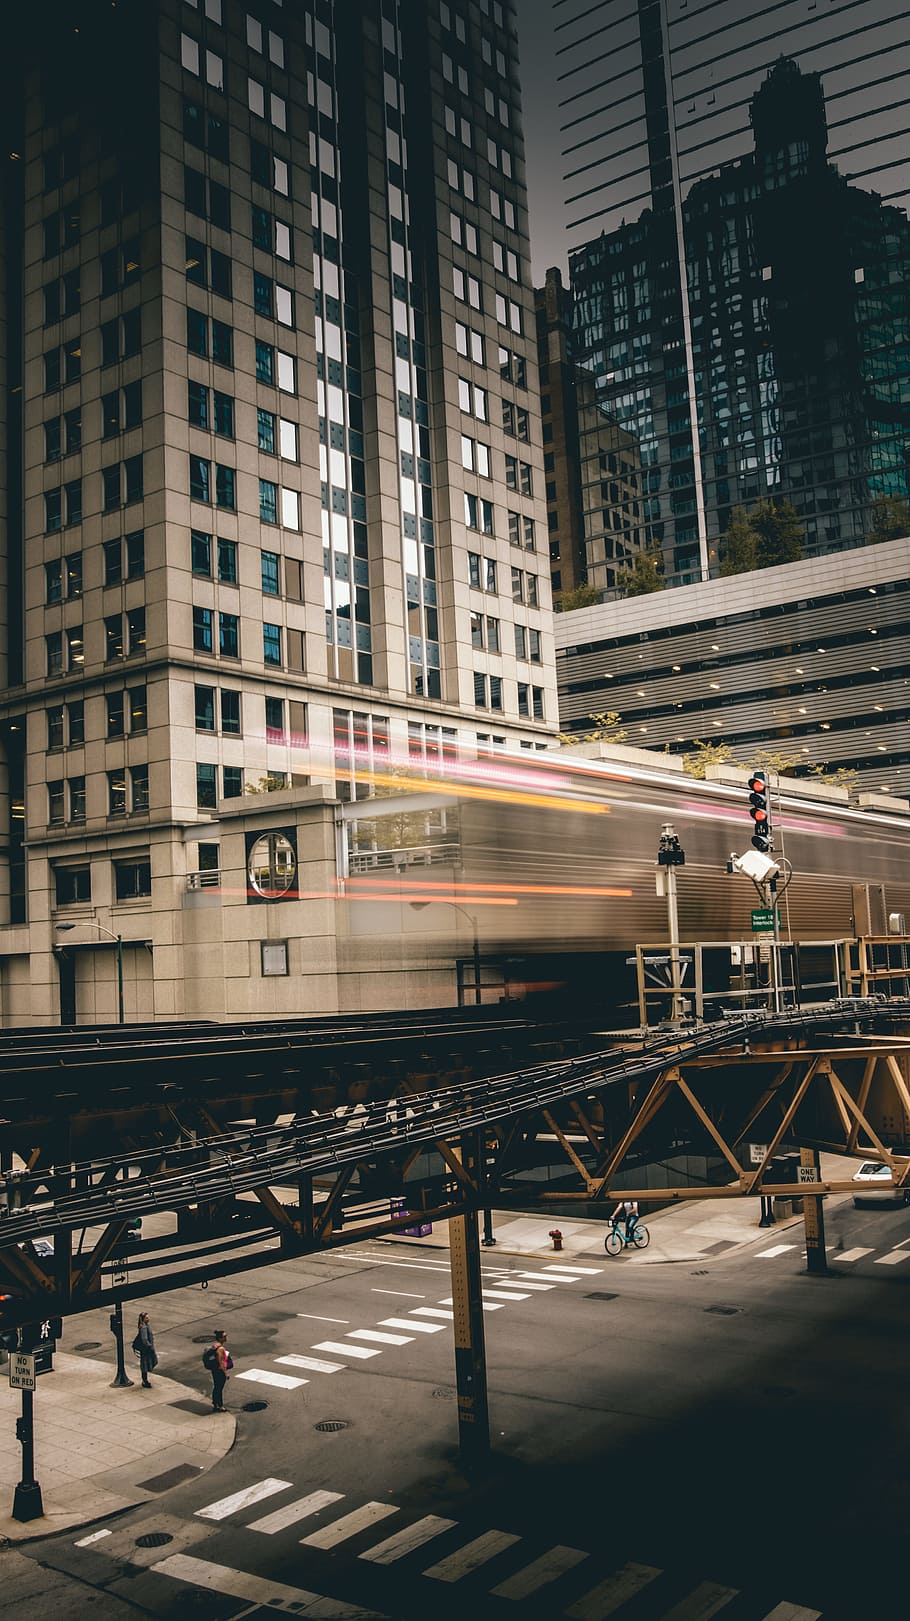 time lapsed photo of train on road, timelapse photography of train passing near buildings